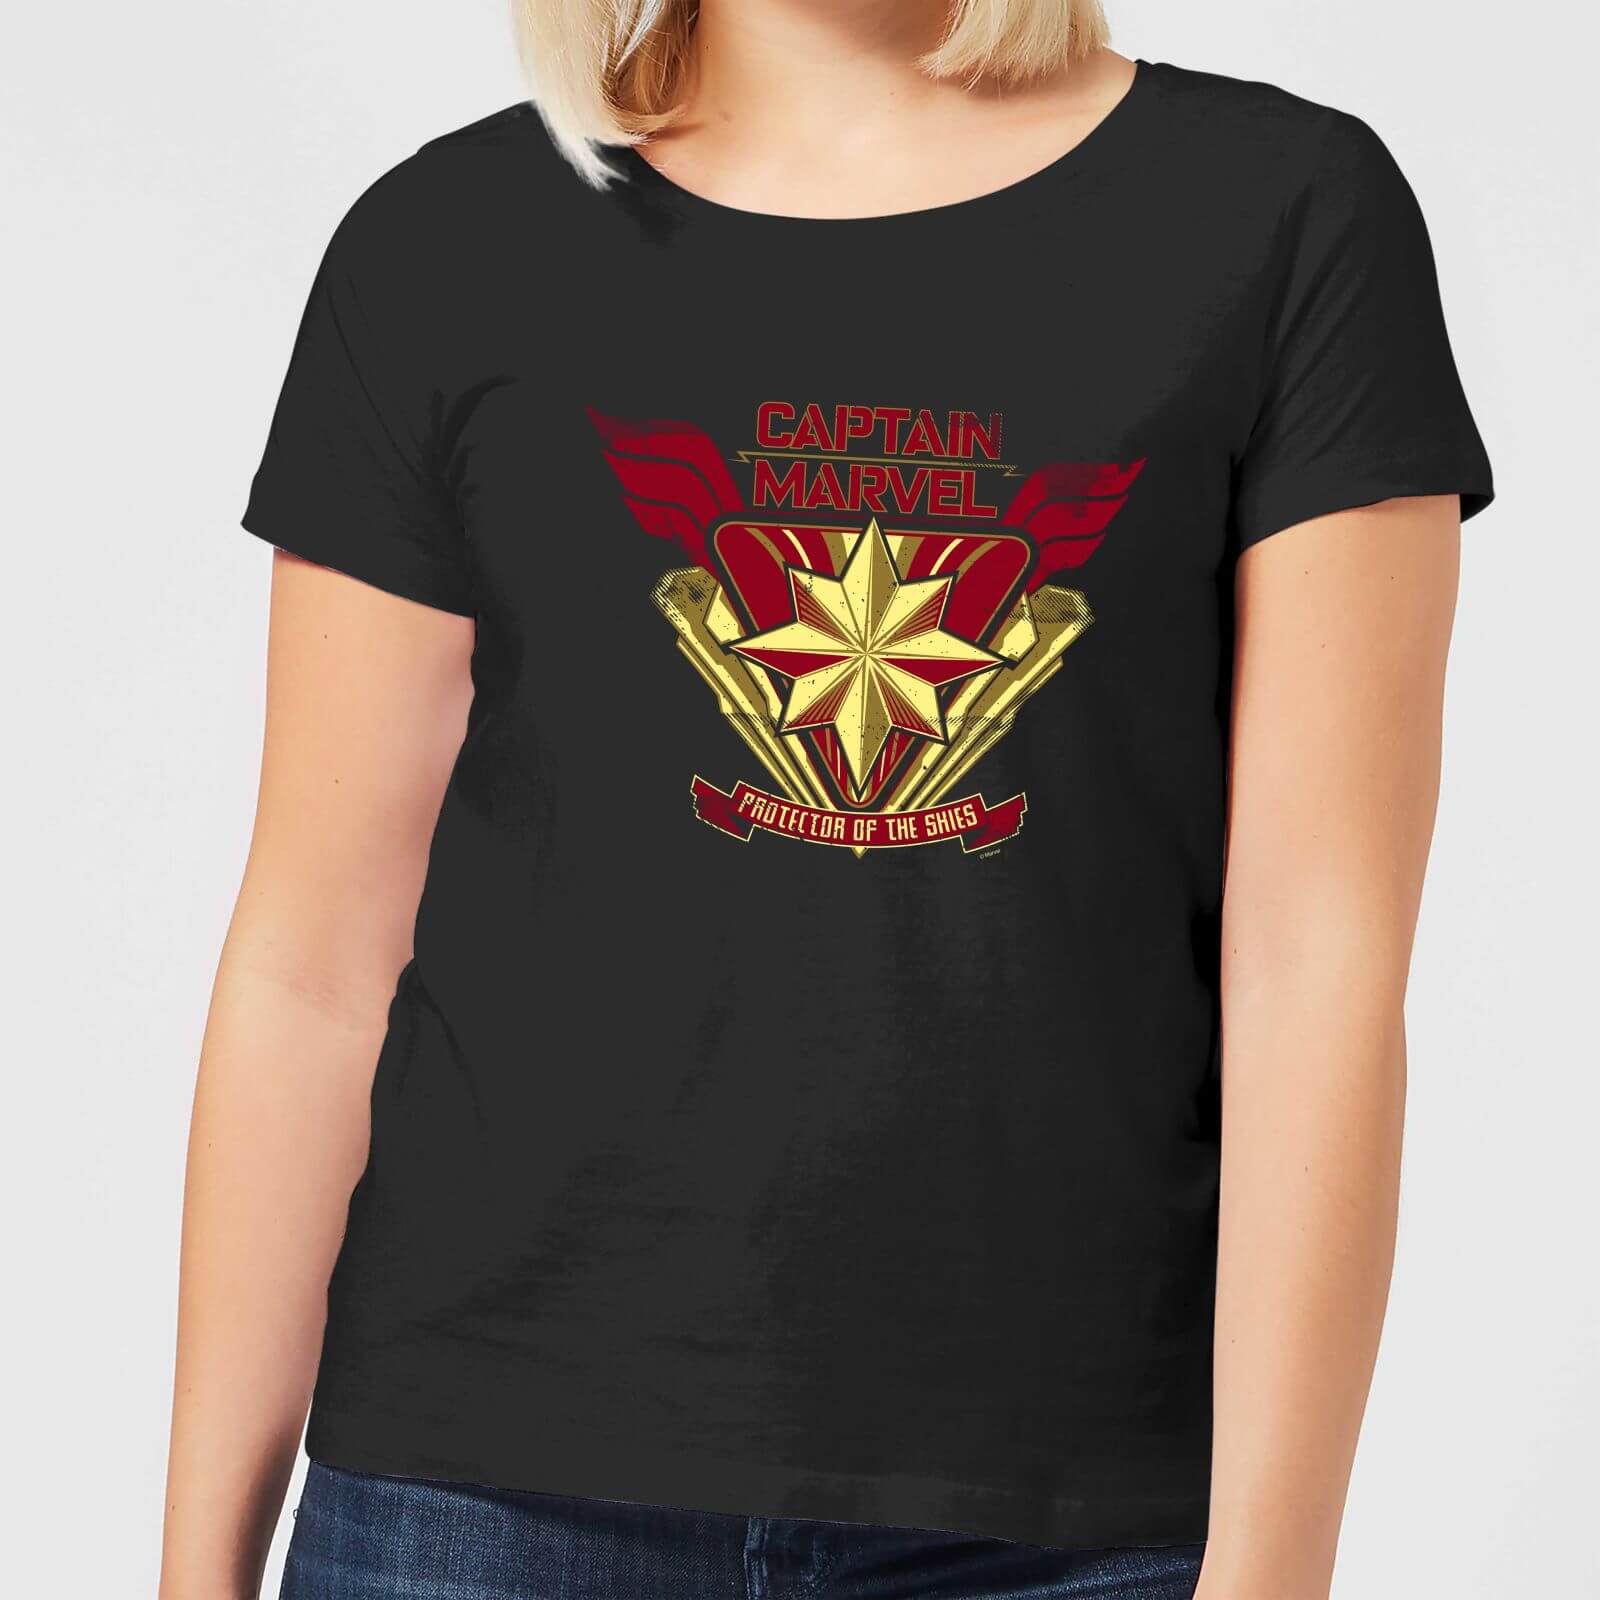 Captain Marvel Protector Of The Skies Women's T-Shirt - Black - M